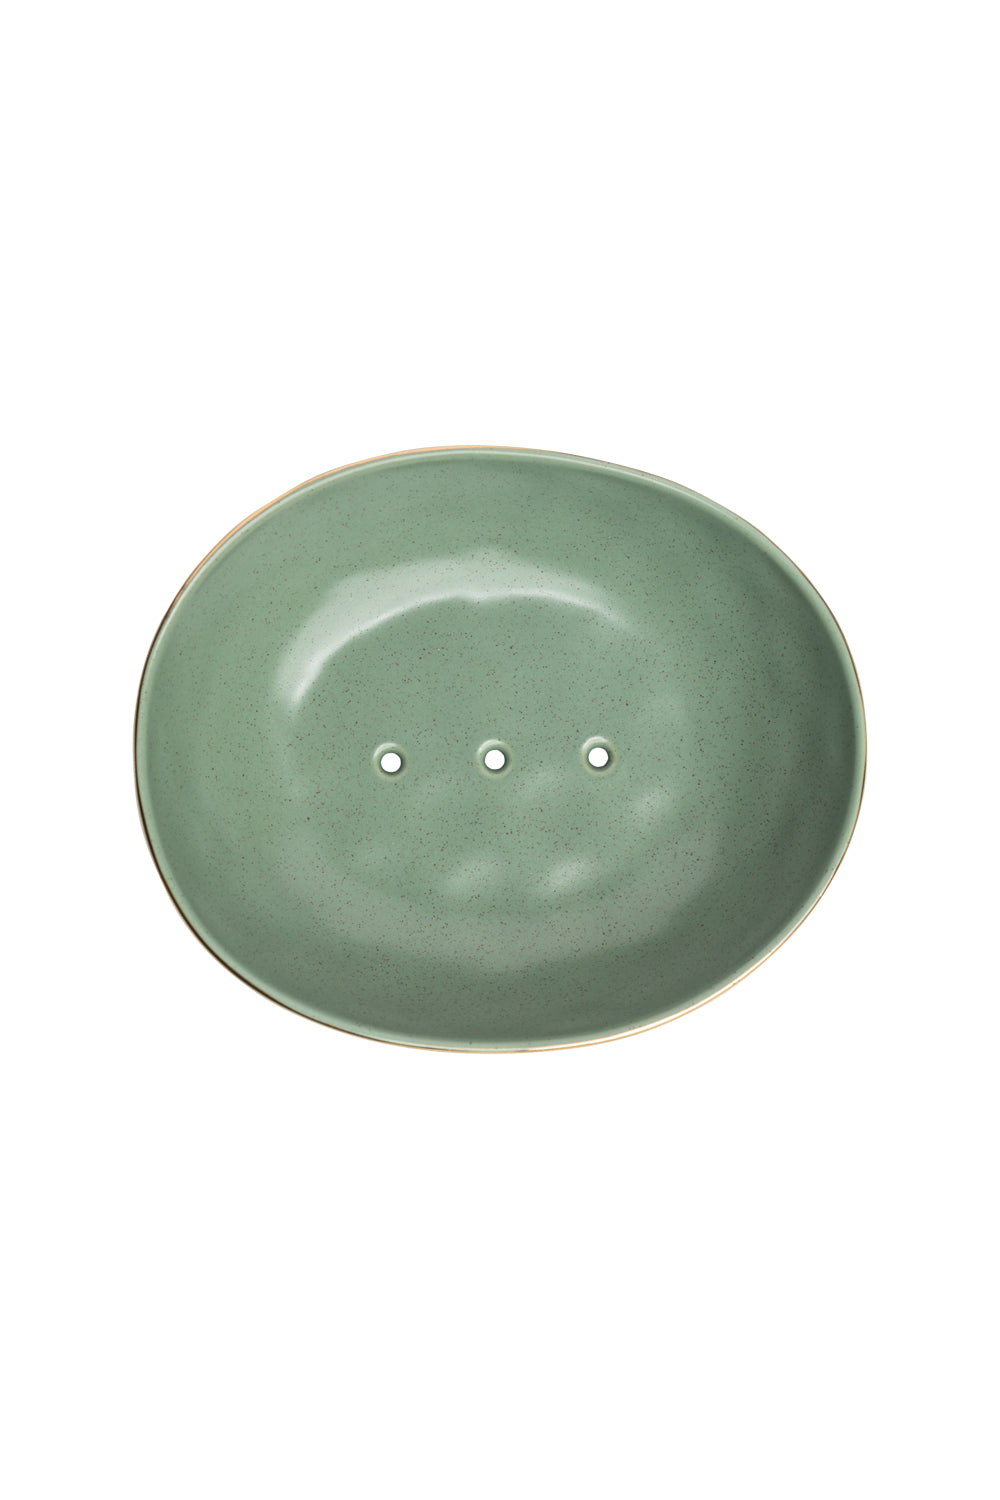 Classic Oval Soap Dish in Sage Green